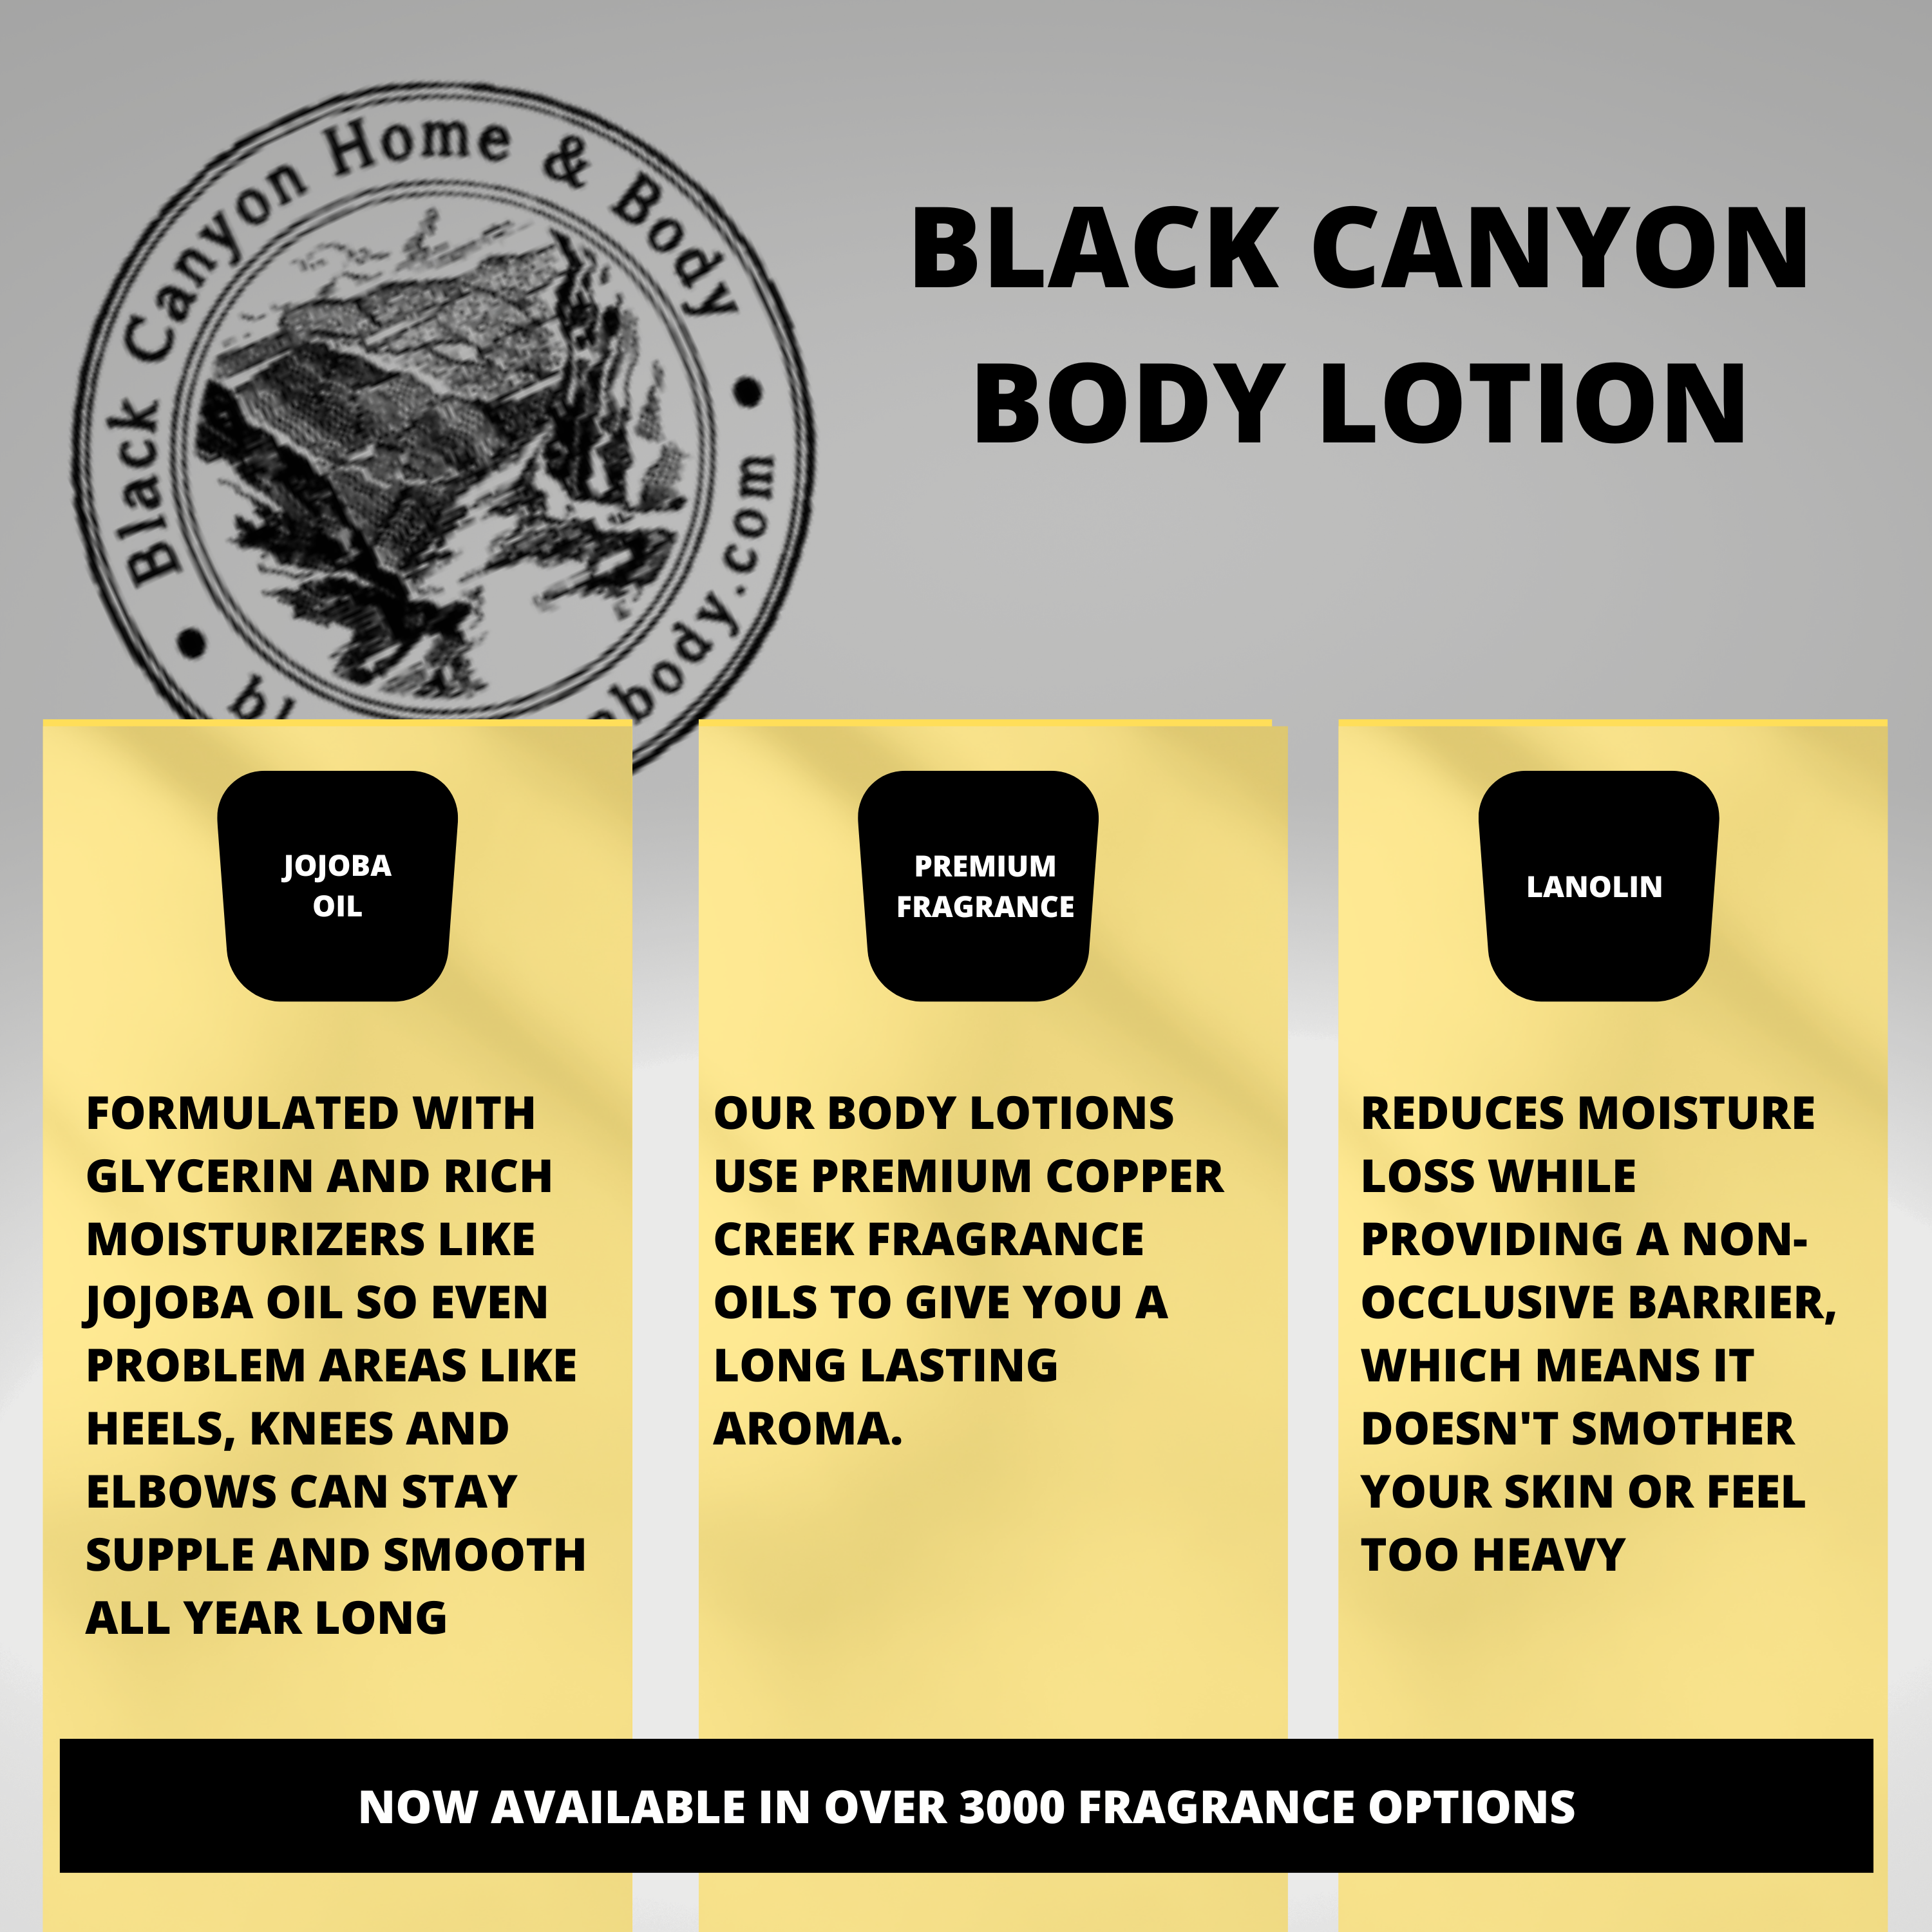 Black Canyon Apple Berry Ice Scented Luxury Body Lotion with Lanolin and Jojoba Oil